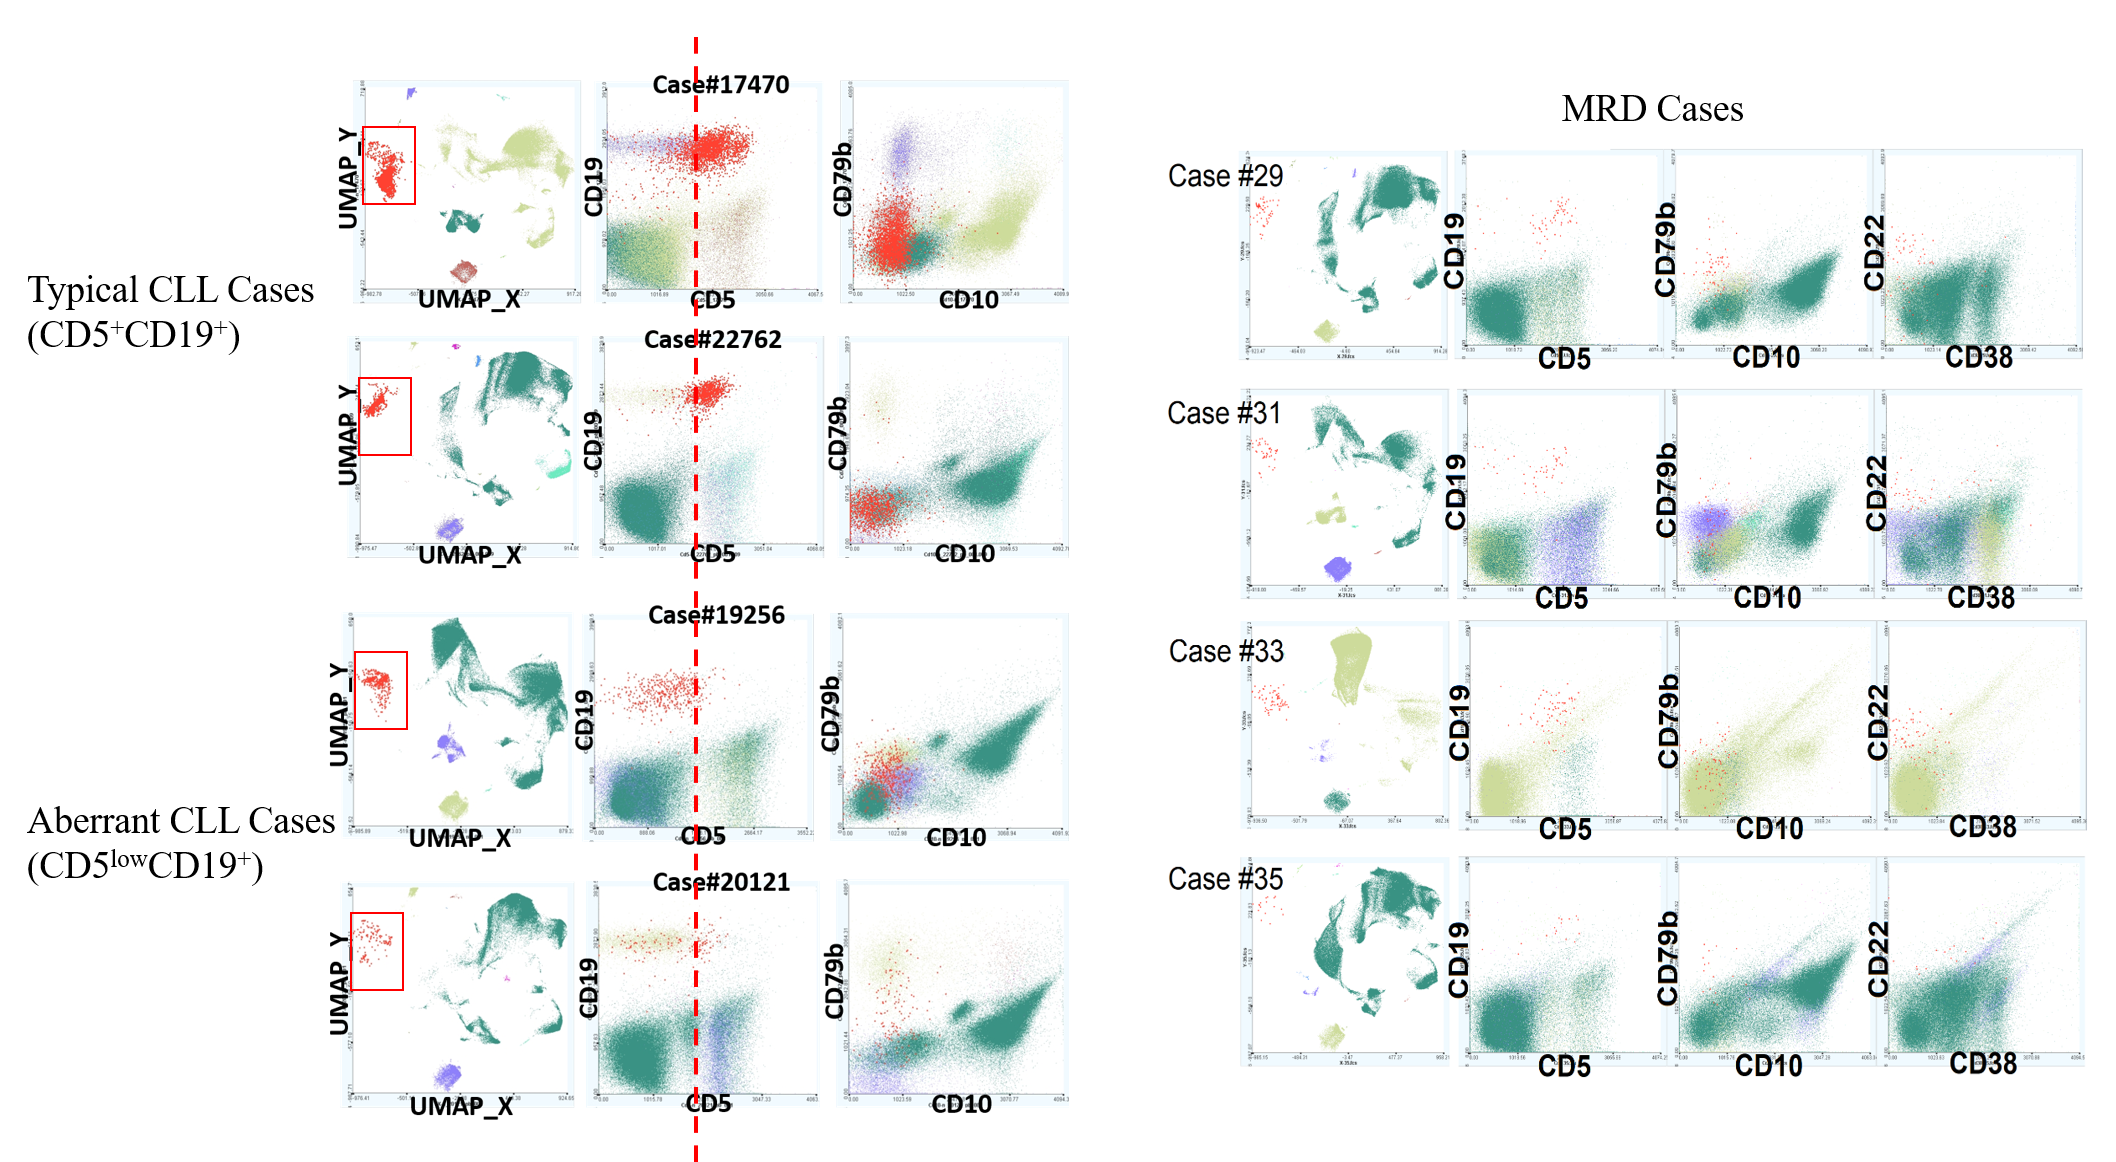 Non-linear embedding transformation (UMAP) of preexisting clinical flow cytometry data clearly identifies typical and atypical CLL, as well as minimum residue disease (MRD) cases.